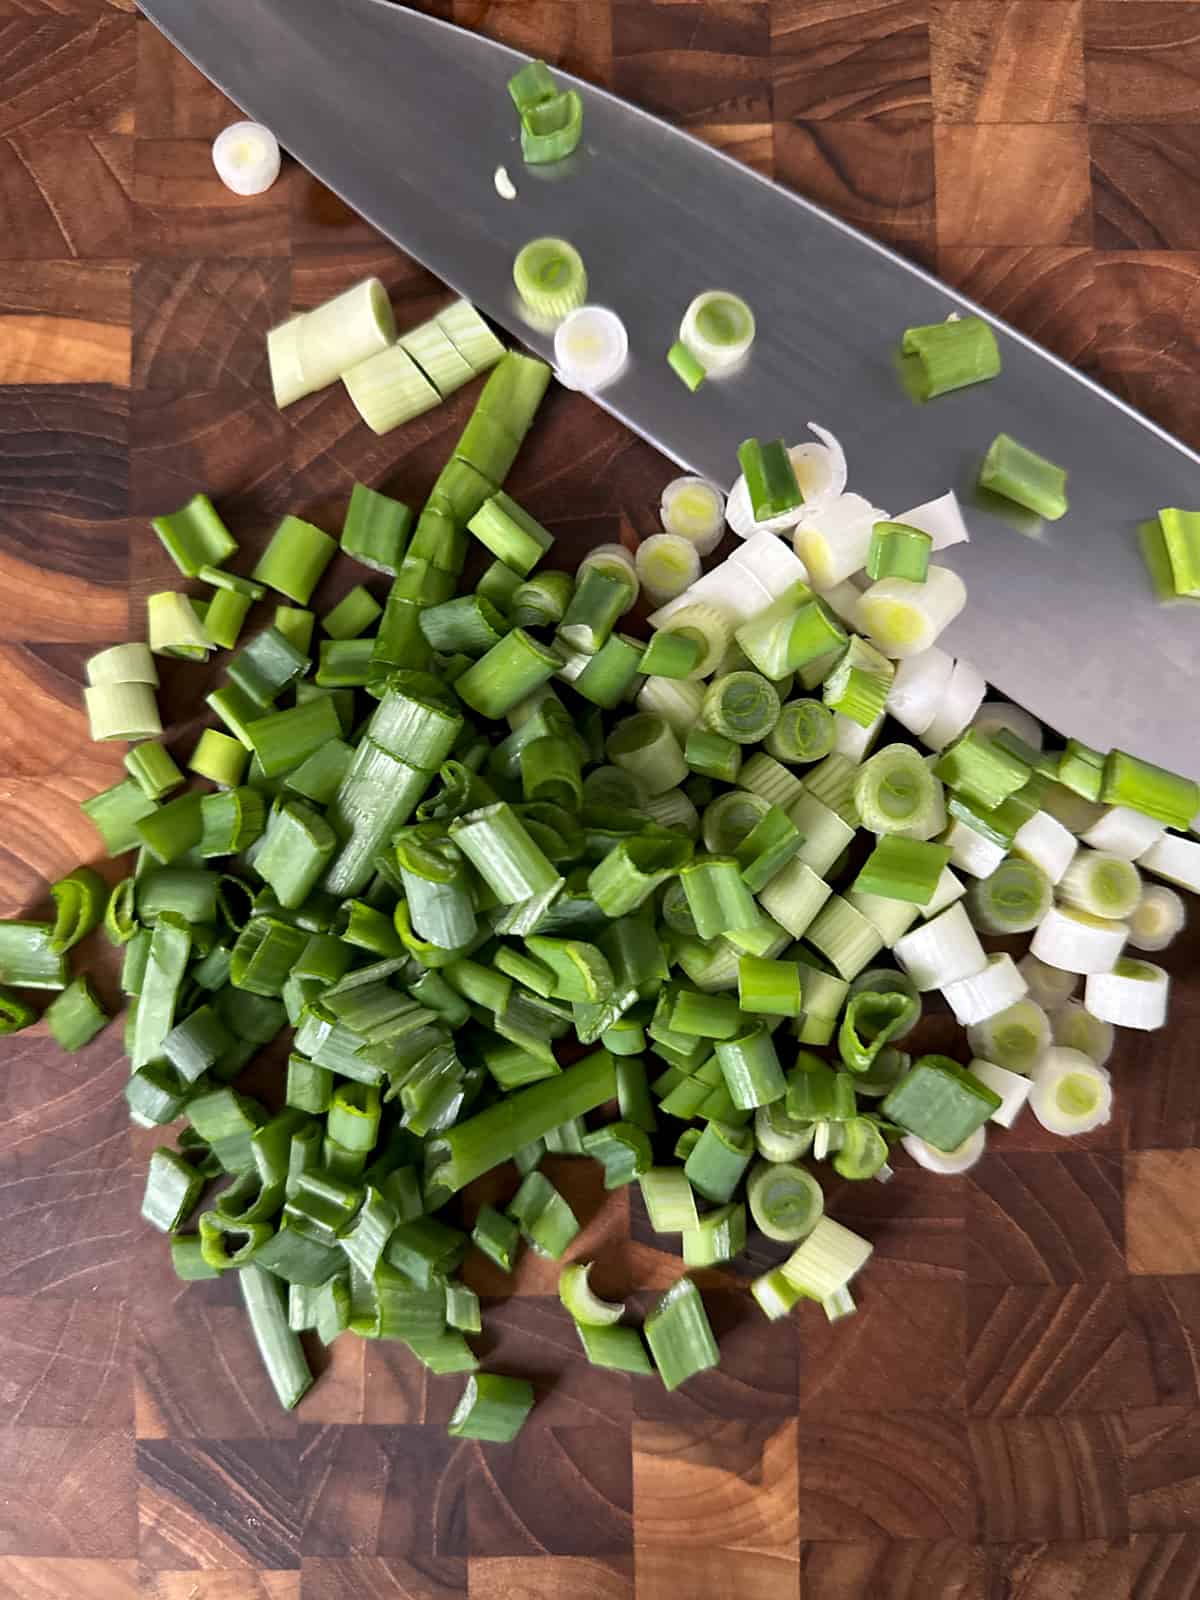 Chopped scallions and a chef's knife on a butcher block.